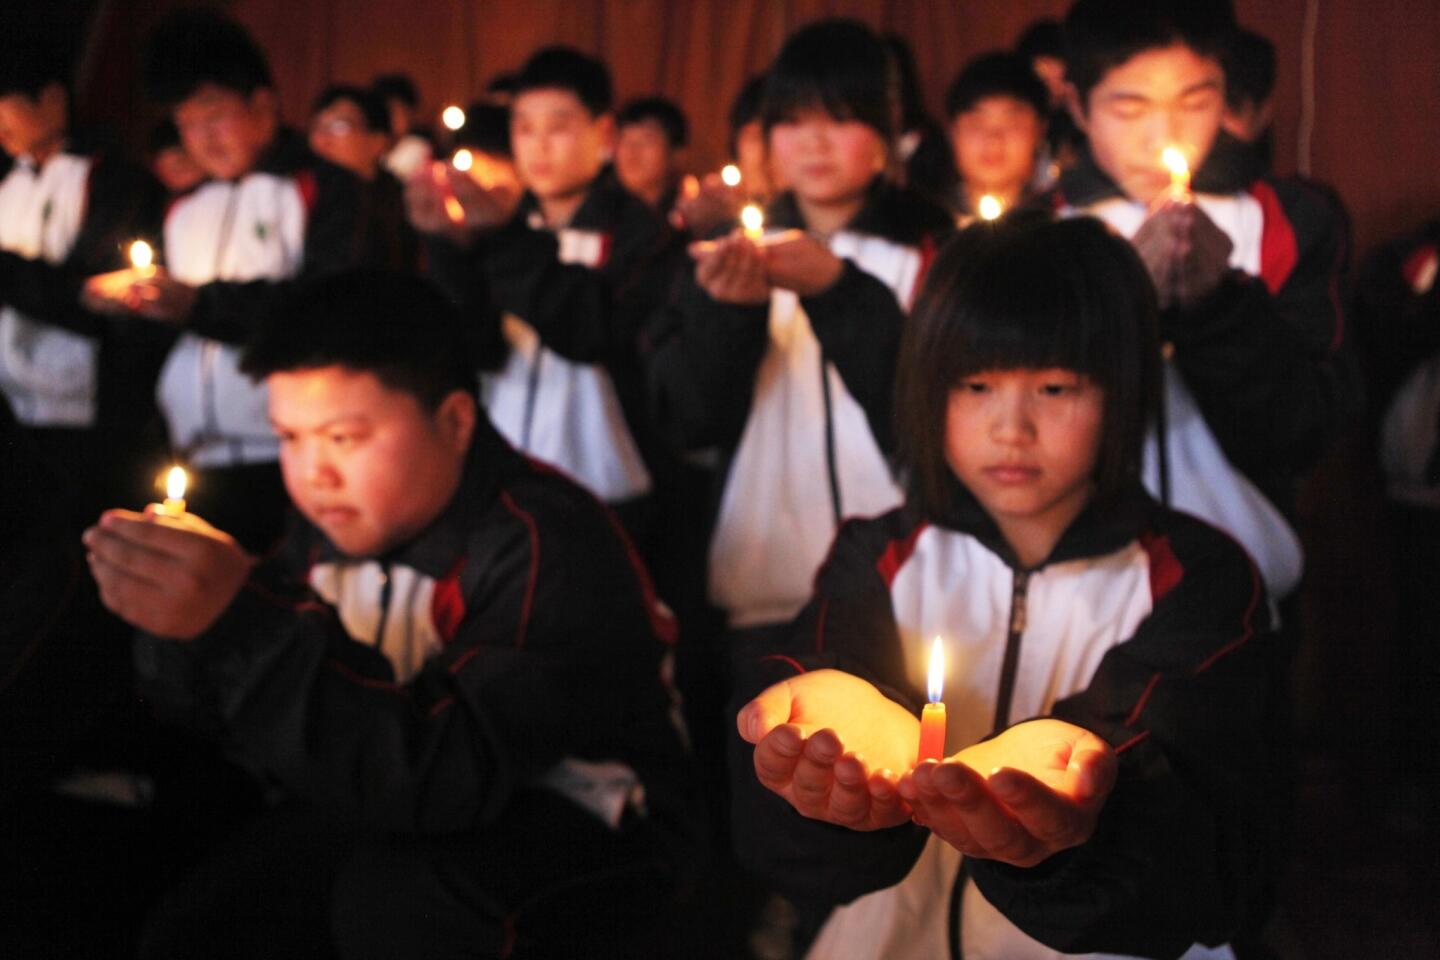 Students hold a vigil for passengers of the missing Malaysia Airline flight MH370 in Lianyungang, China, on March 25.